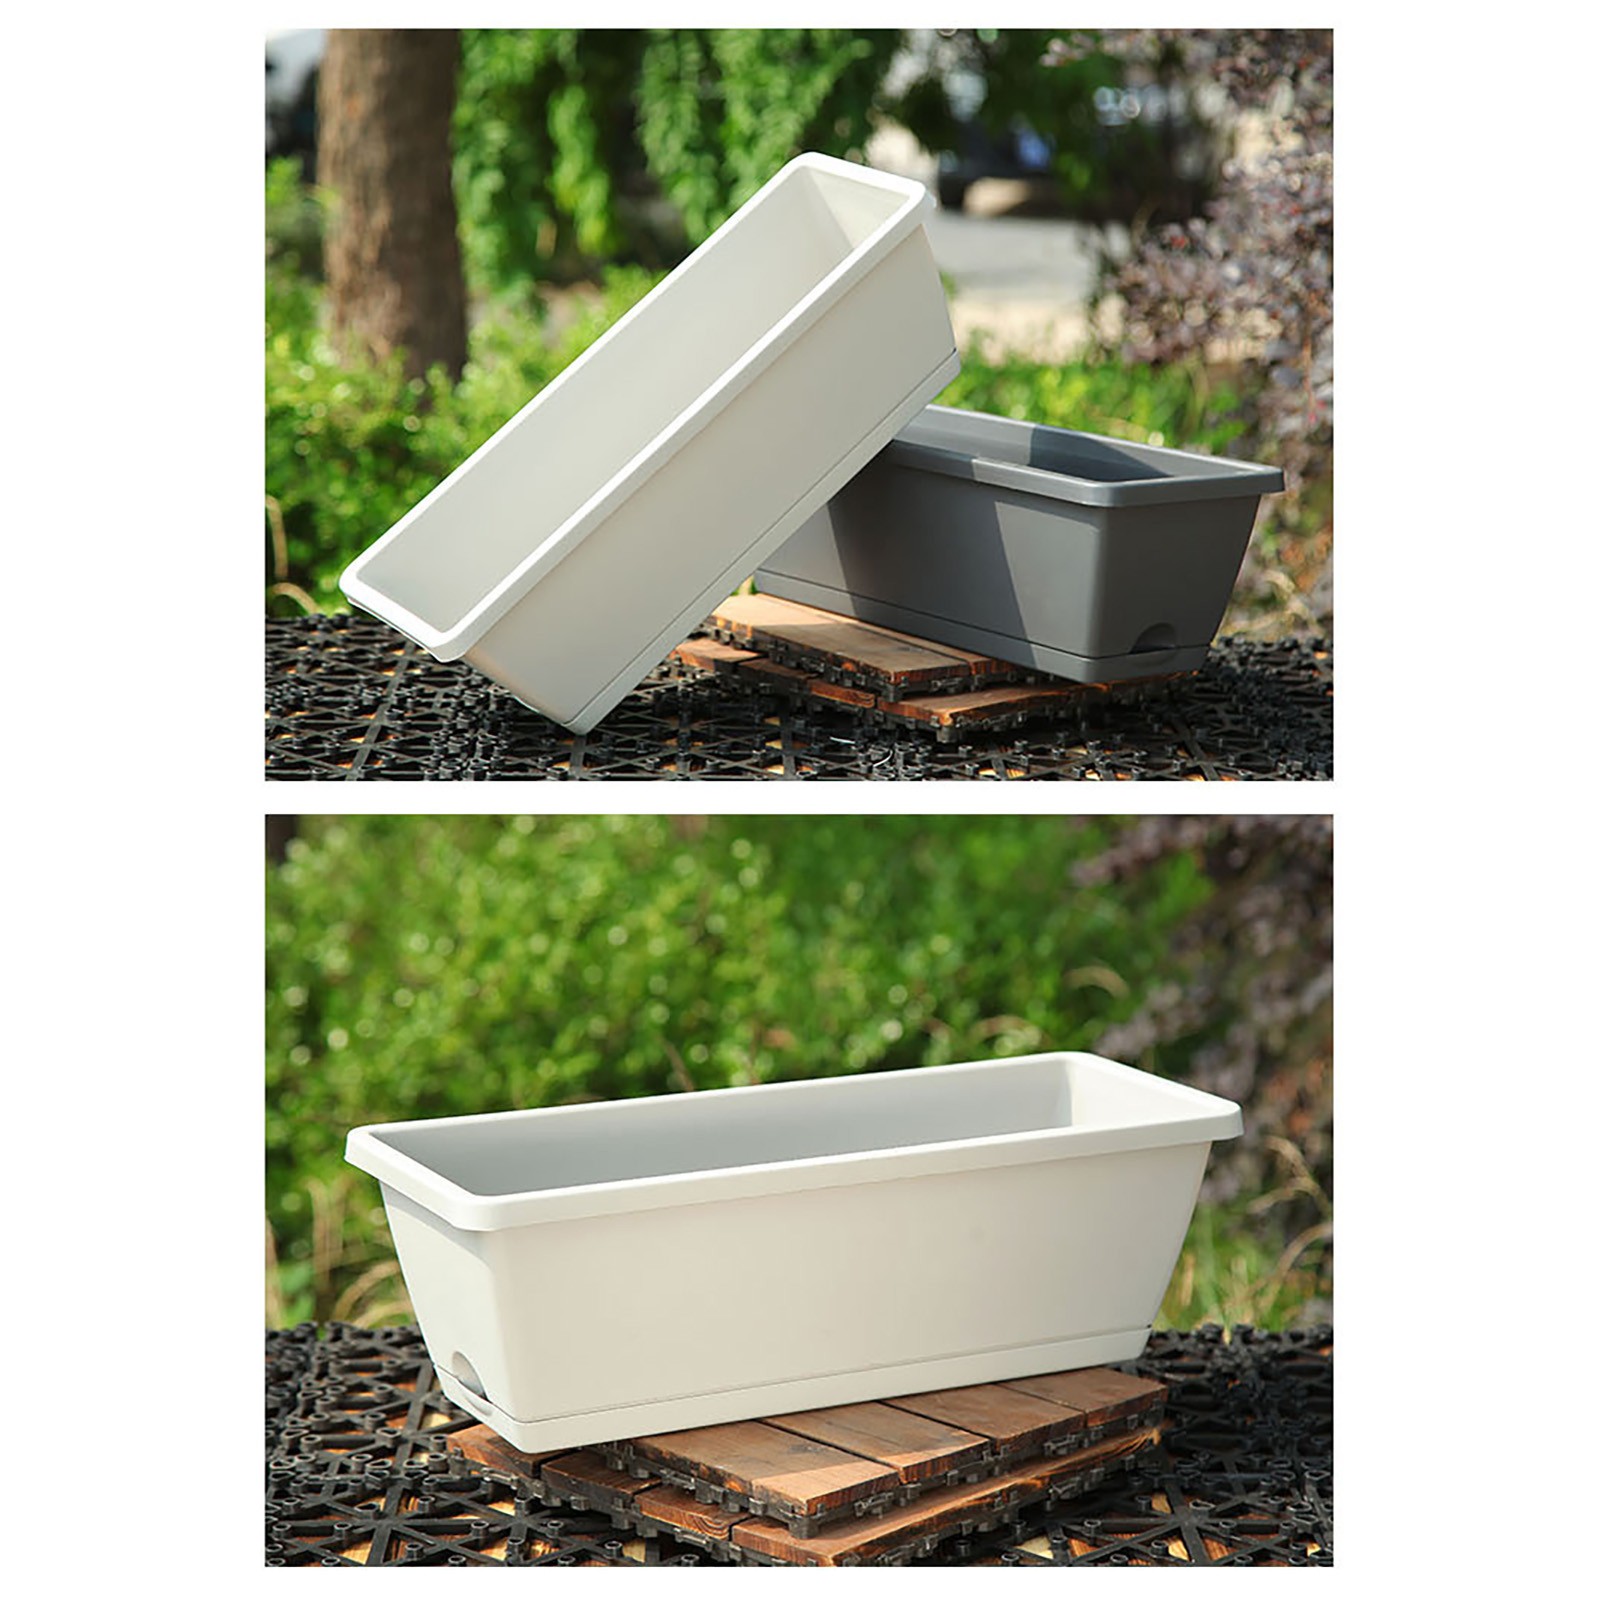 Wovilon Window Box Planter, Plastic Vegetable Flower Planters Boxes Rectangular Flower Pots with Saucers for Indoor Outdoor Garden, Patio, Home Decor - image 5 of 8